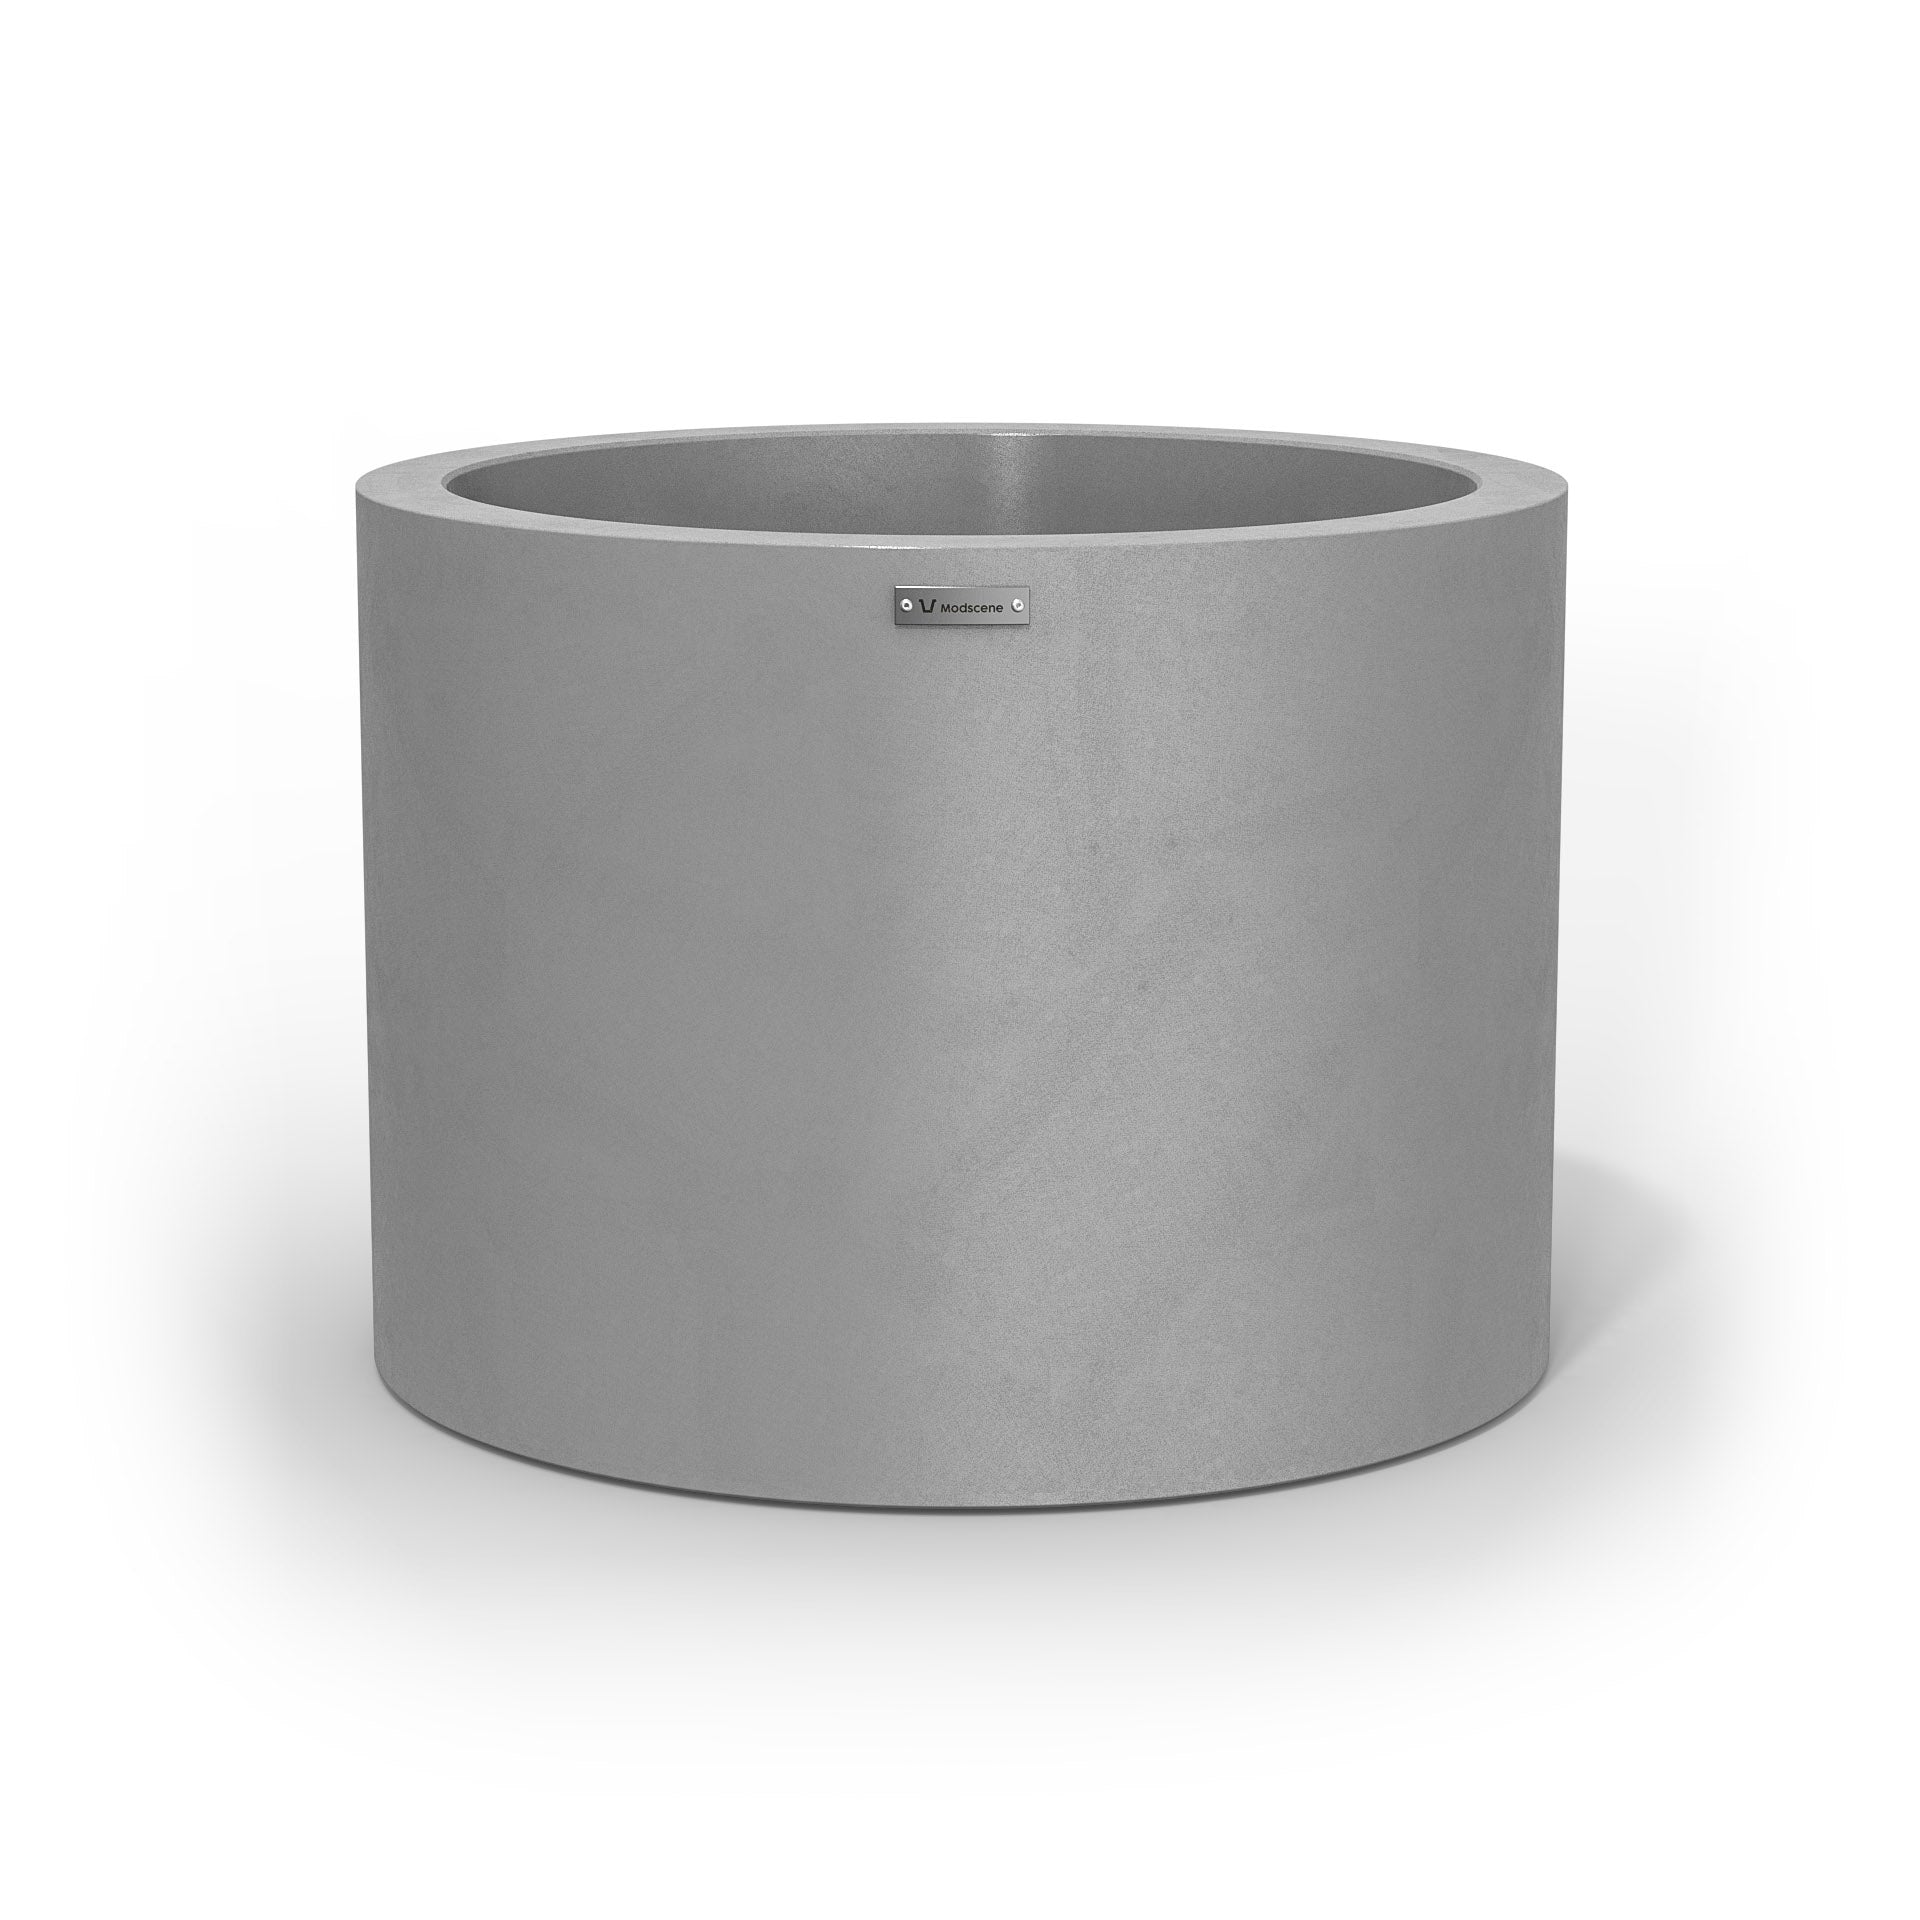 A cylinder shaped pot planter in a brushed light grey colour.